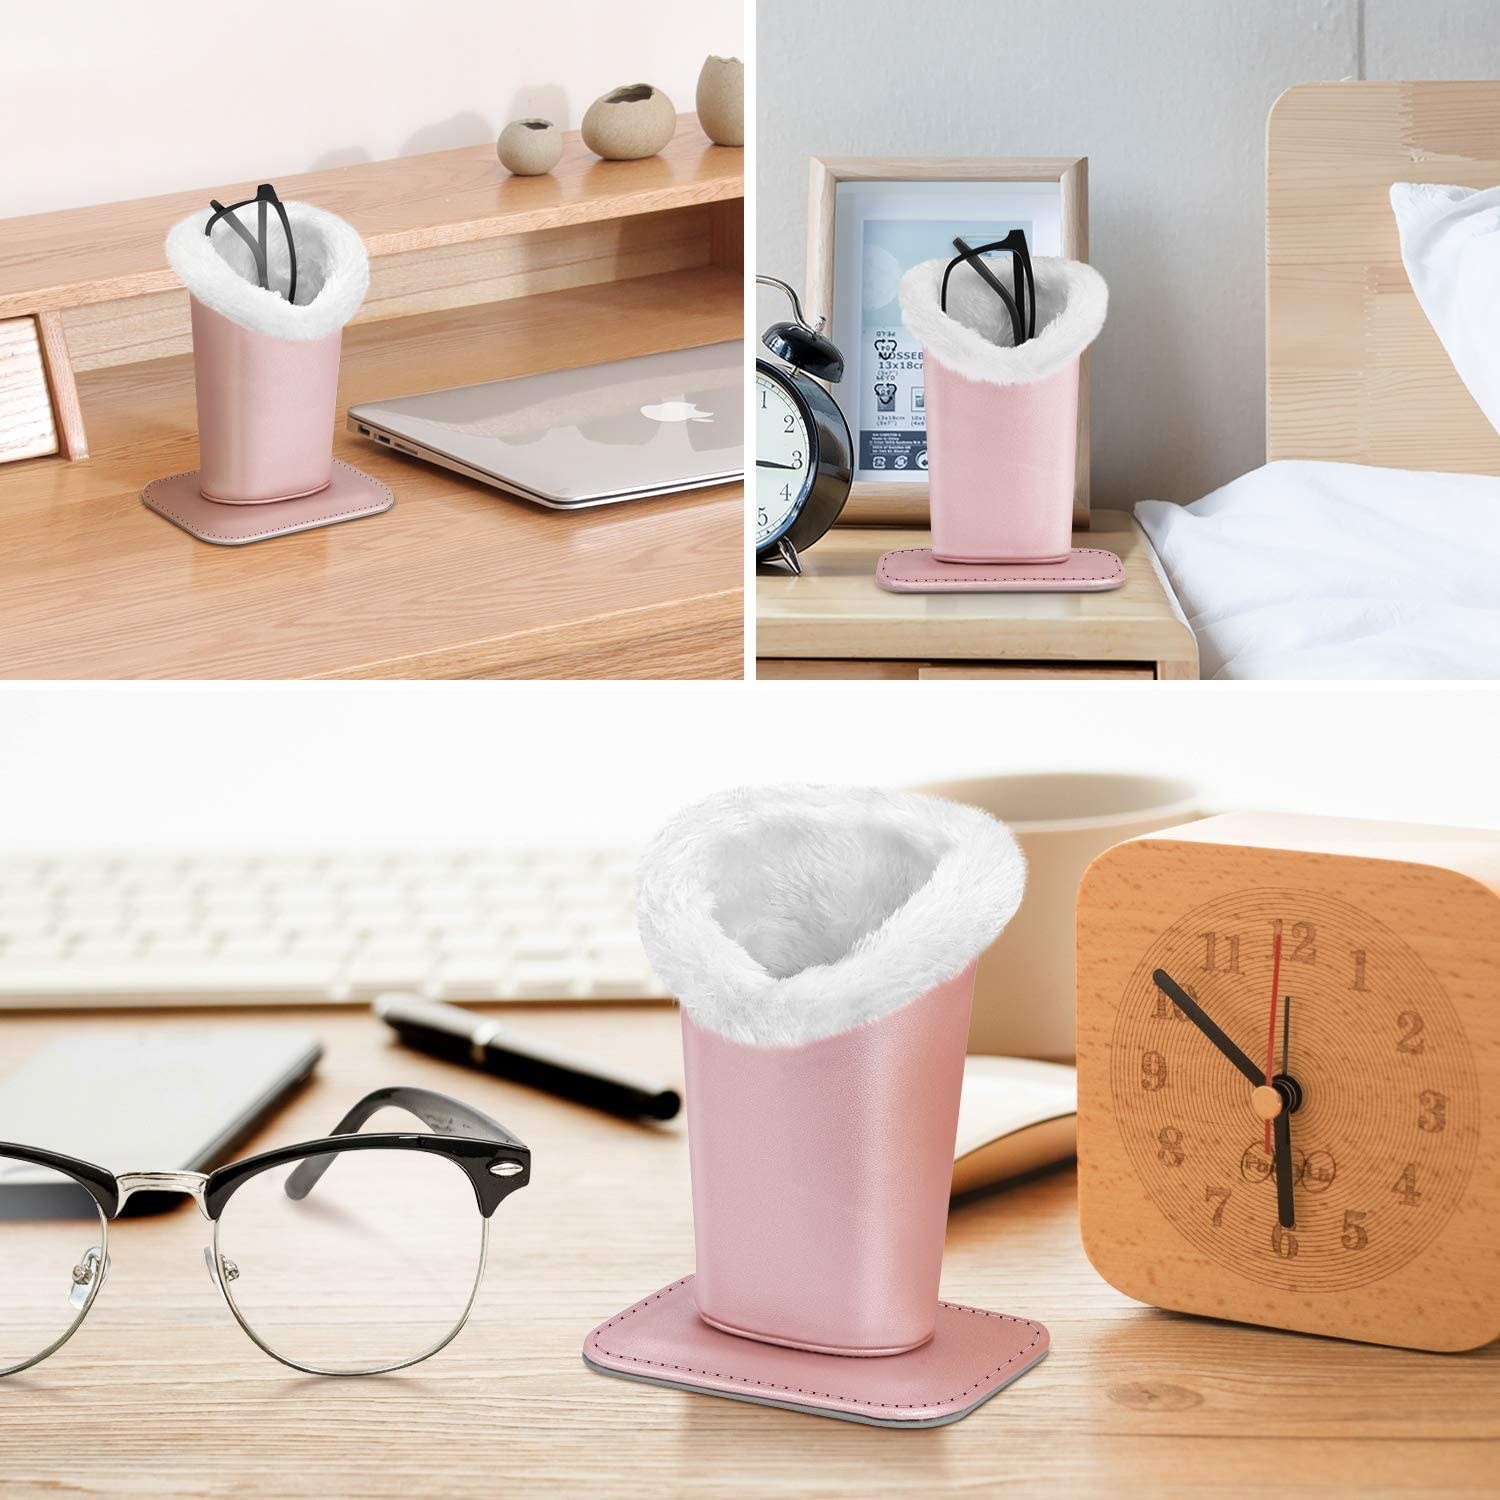 the case on a desk, nightstand, and next to a pair of glasses